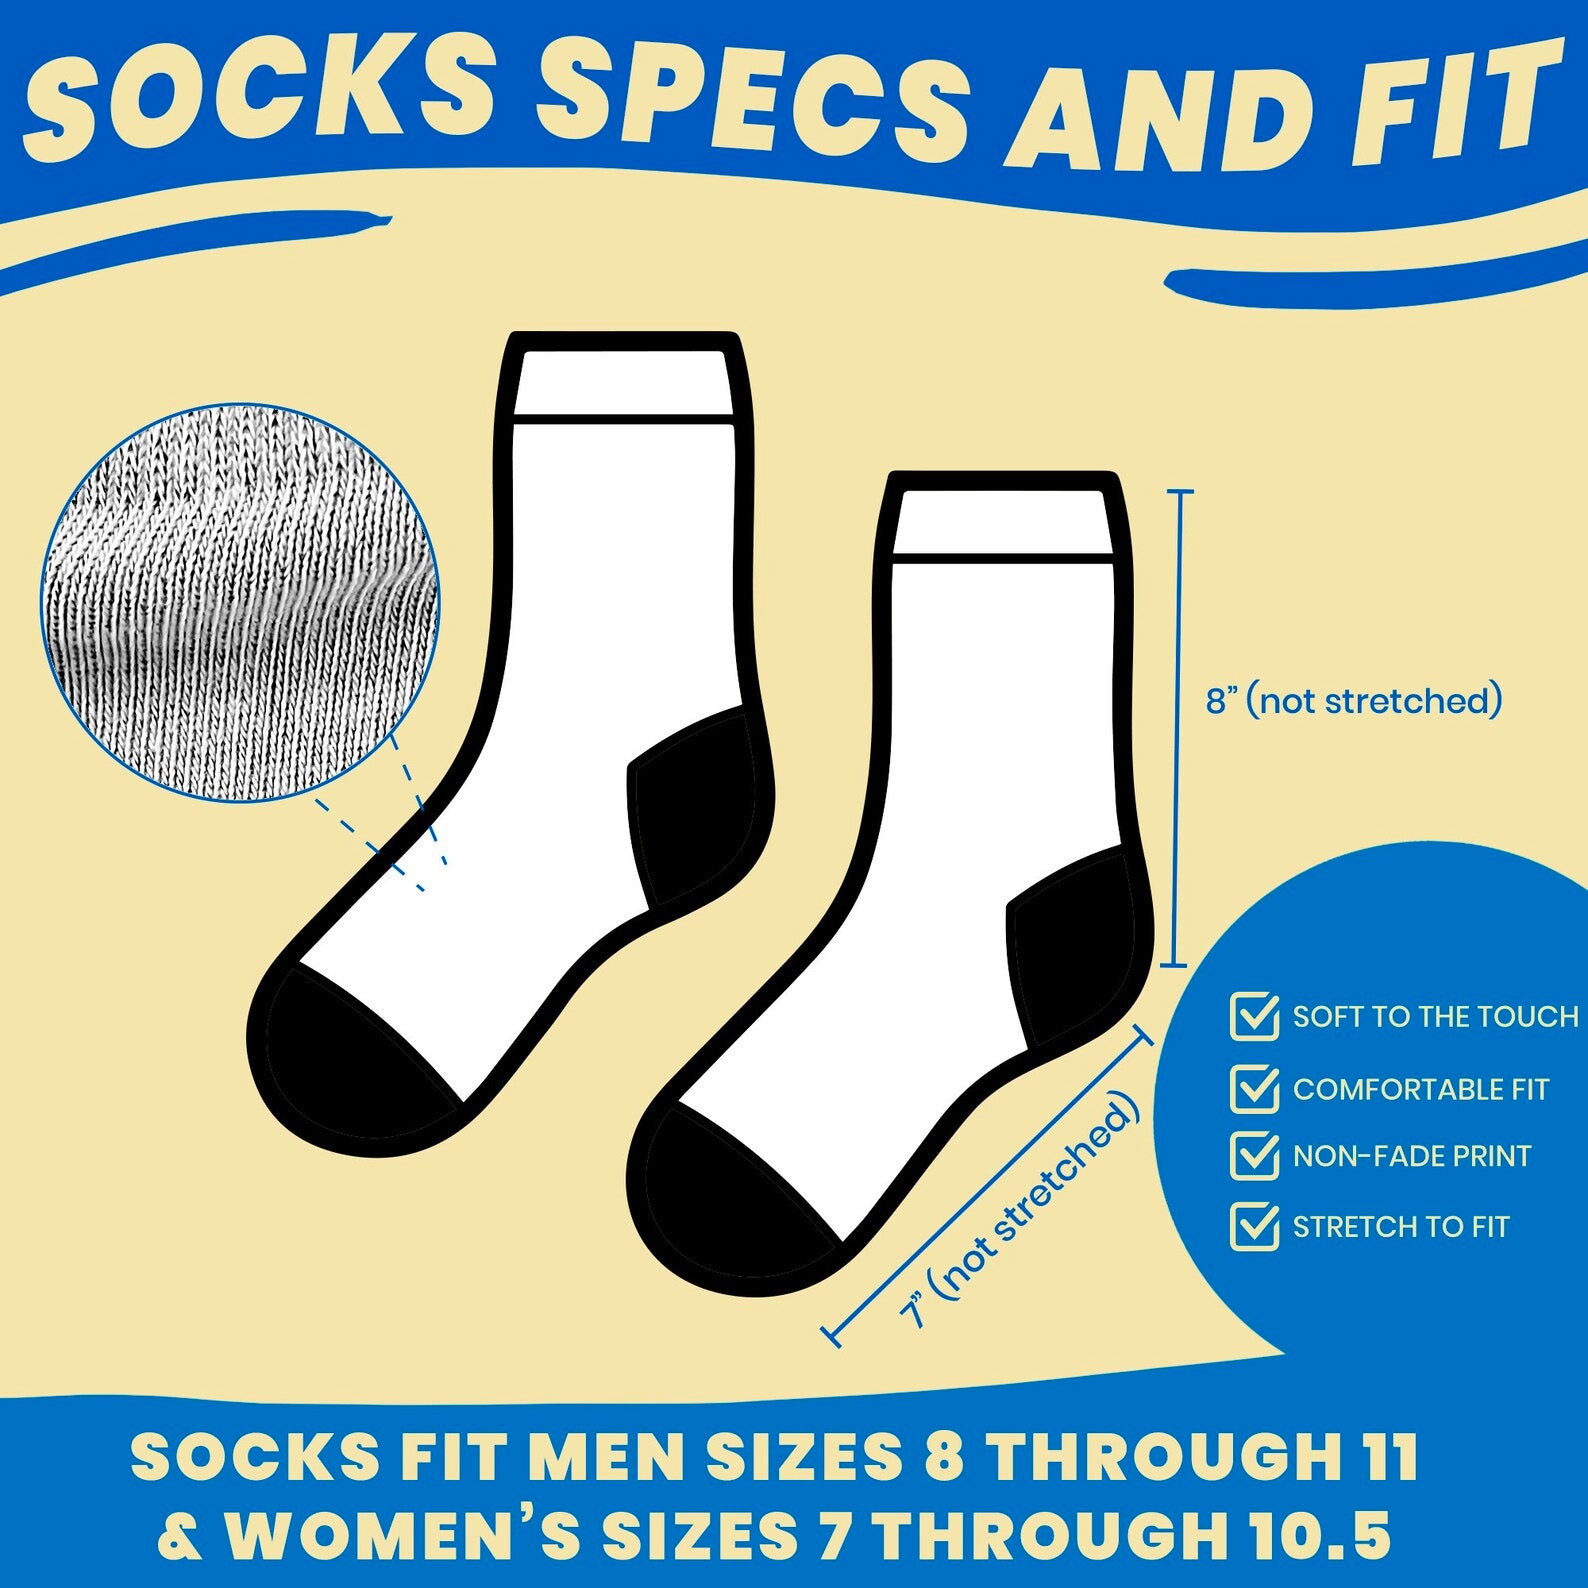 Retirement gift for coworker personalized socks with faces socks specs and fit. Socks fit sizes 7-12 in men, most women and kids sizes.